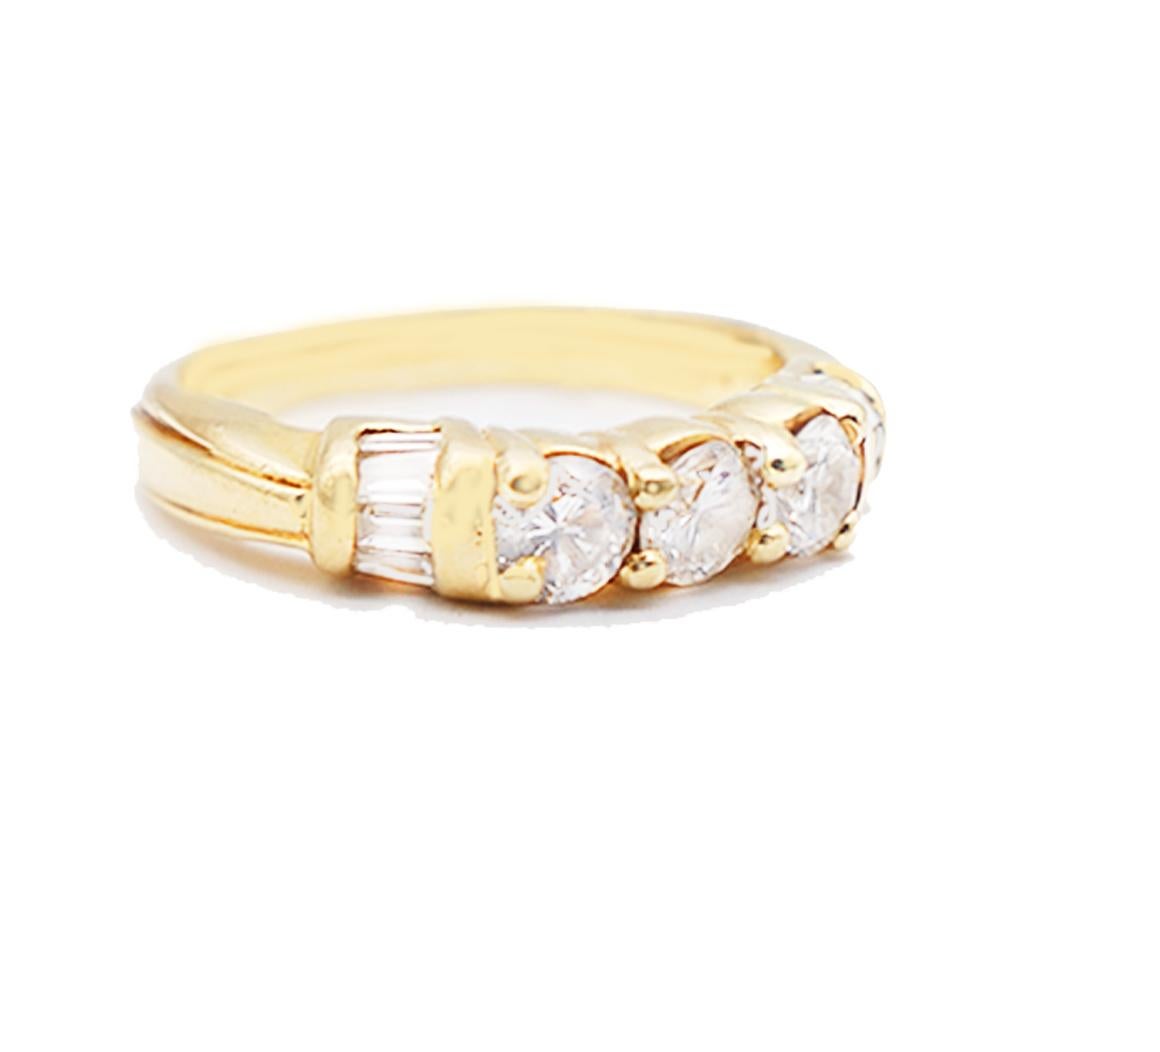 Traditional Engagement, Diamond Band set in 14 karat Yellow Gold.
3-stone diamonds are accented by baguettes on either sides. The center round diamonds are 4 mm. and have a total weight of .99 carat. 
On either side are  (10) baguette diamonds